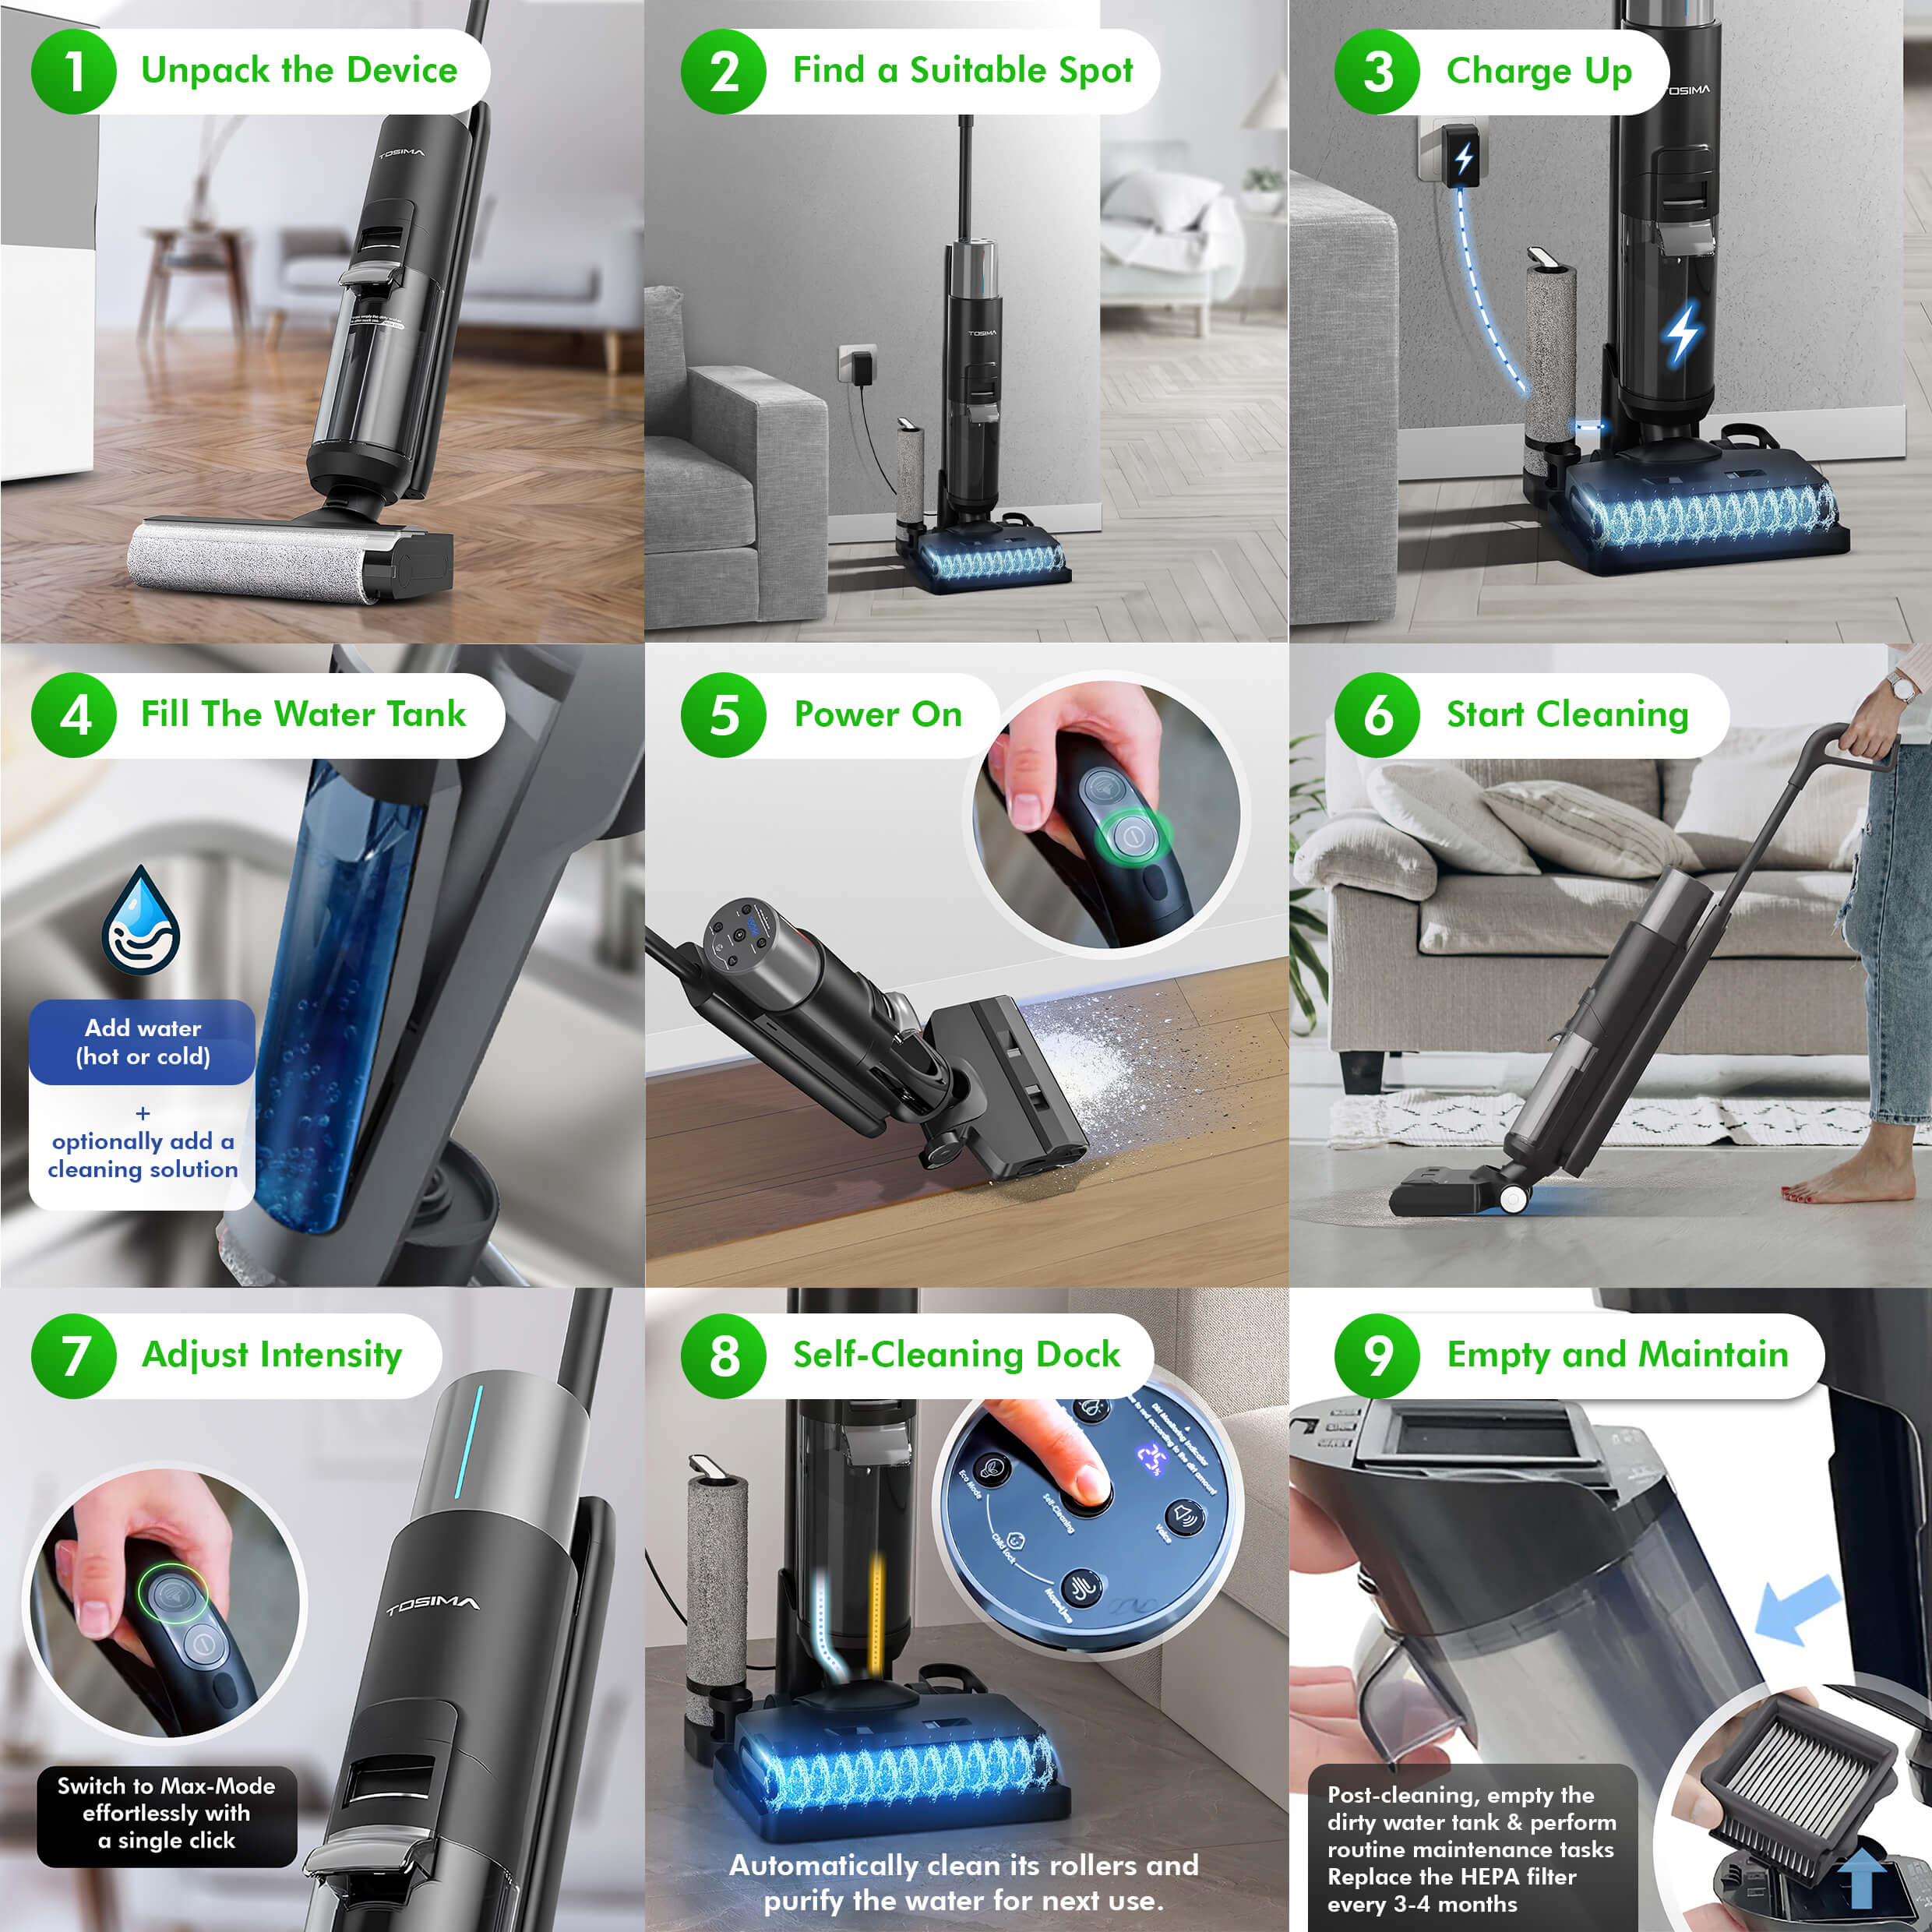 Infographic showing 9 Steps to Operate ZenVacu Vacuum Cleaner: 1. Unboxing the product, 2. Assembling components, 3. Charging the battery, 4. Fill the water tank 5. Powering on, 6. Starting the cleaning process, 7. AI adjust Intensity (20.000 Pa) 8. Automatic self-emptying function and Self-cleaning mode and dock, 9. Long-term Empty and Maintenance tips